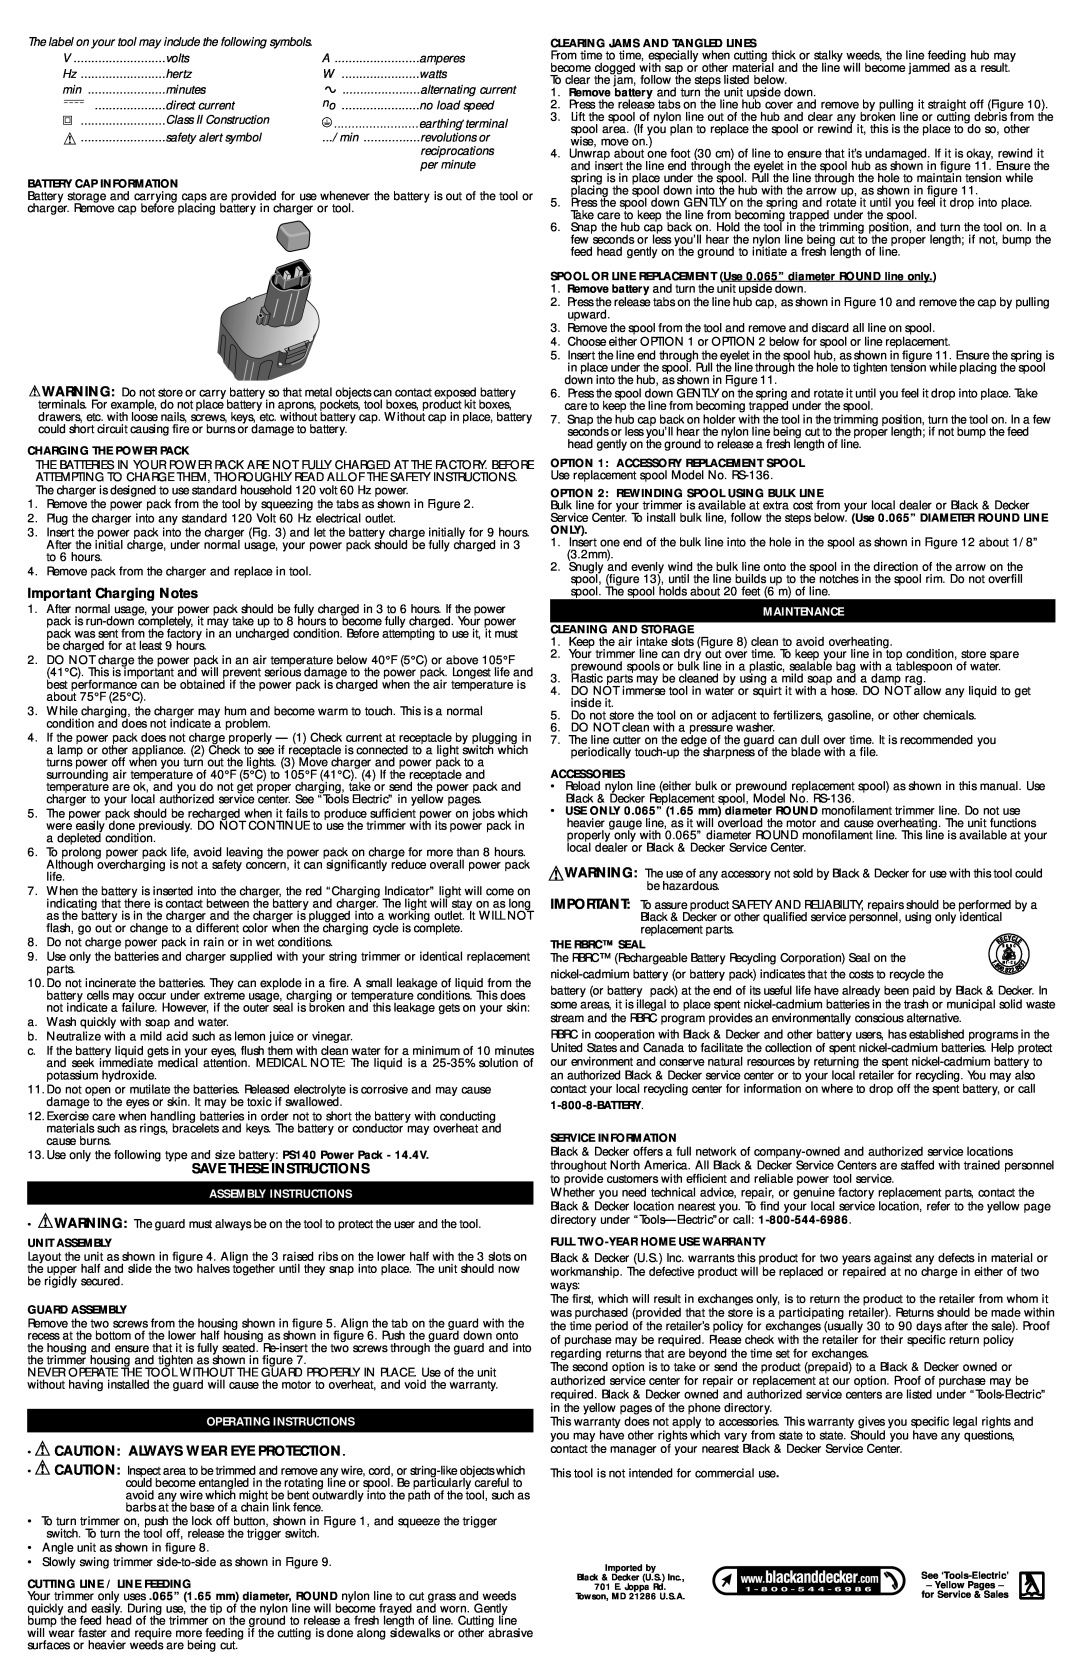 Black & Decker CST500 Important Charging Notes, Save These Instructions, Assembly Instructions, Operating Instructions 